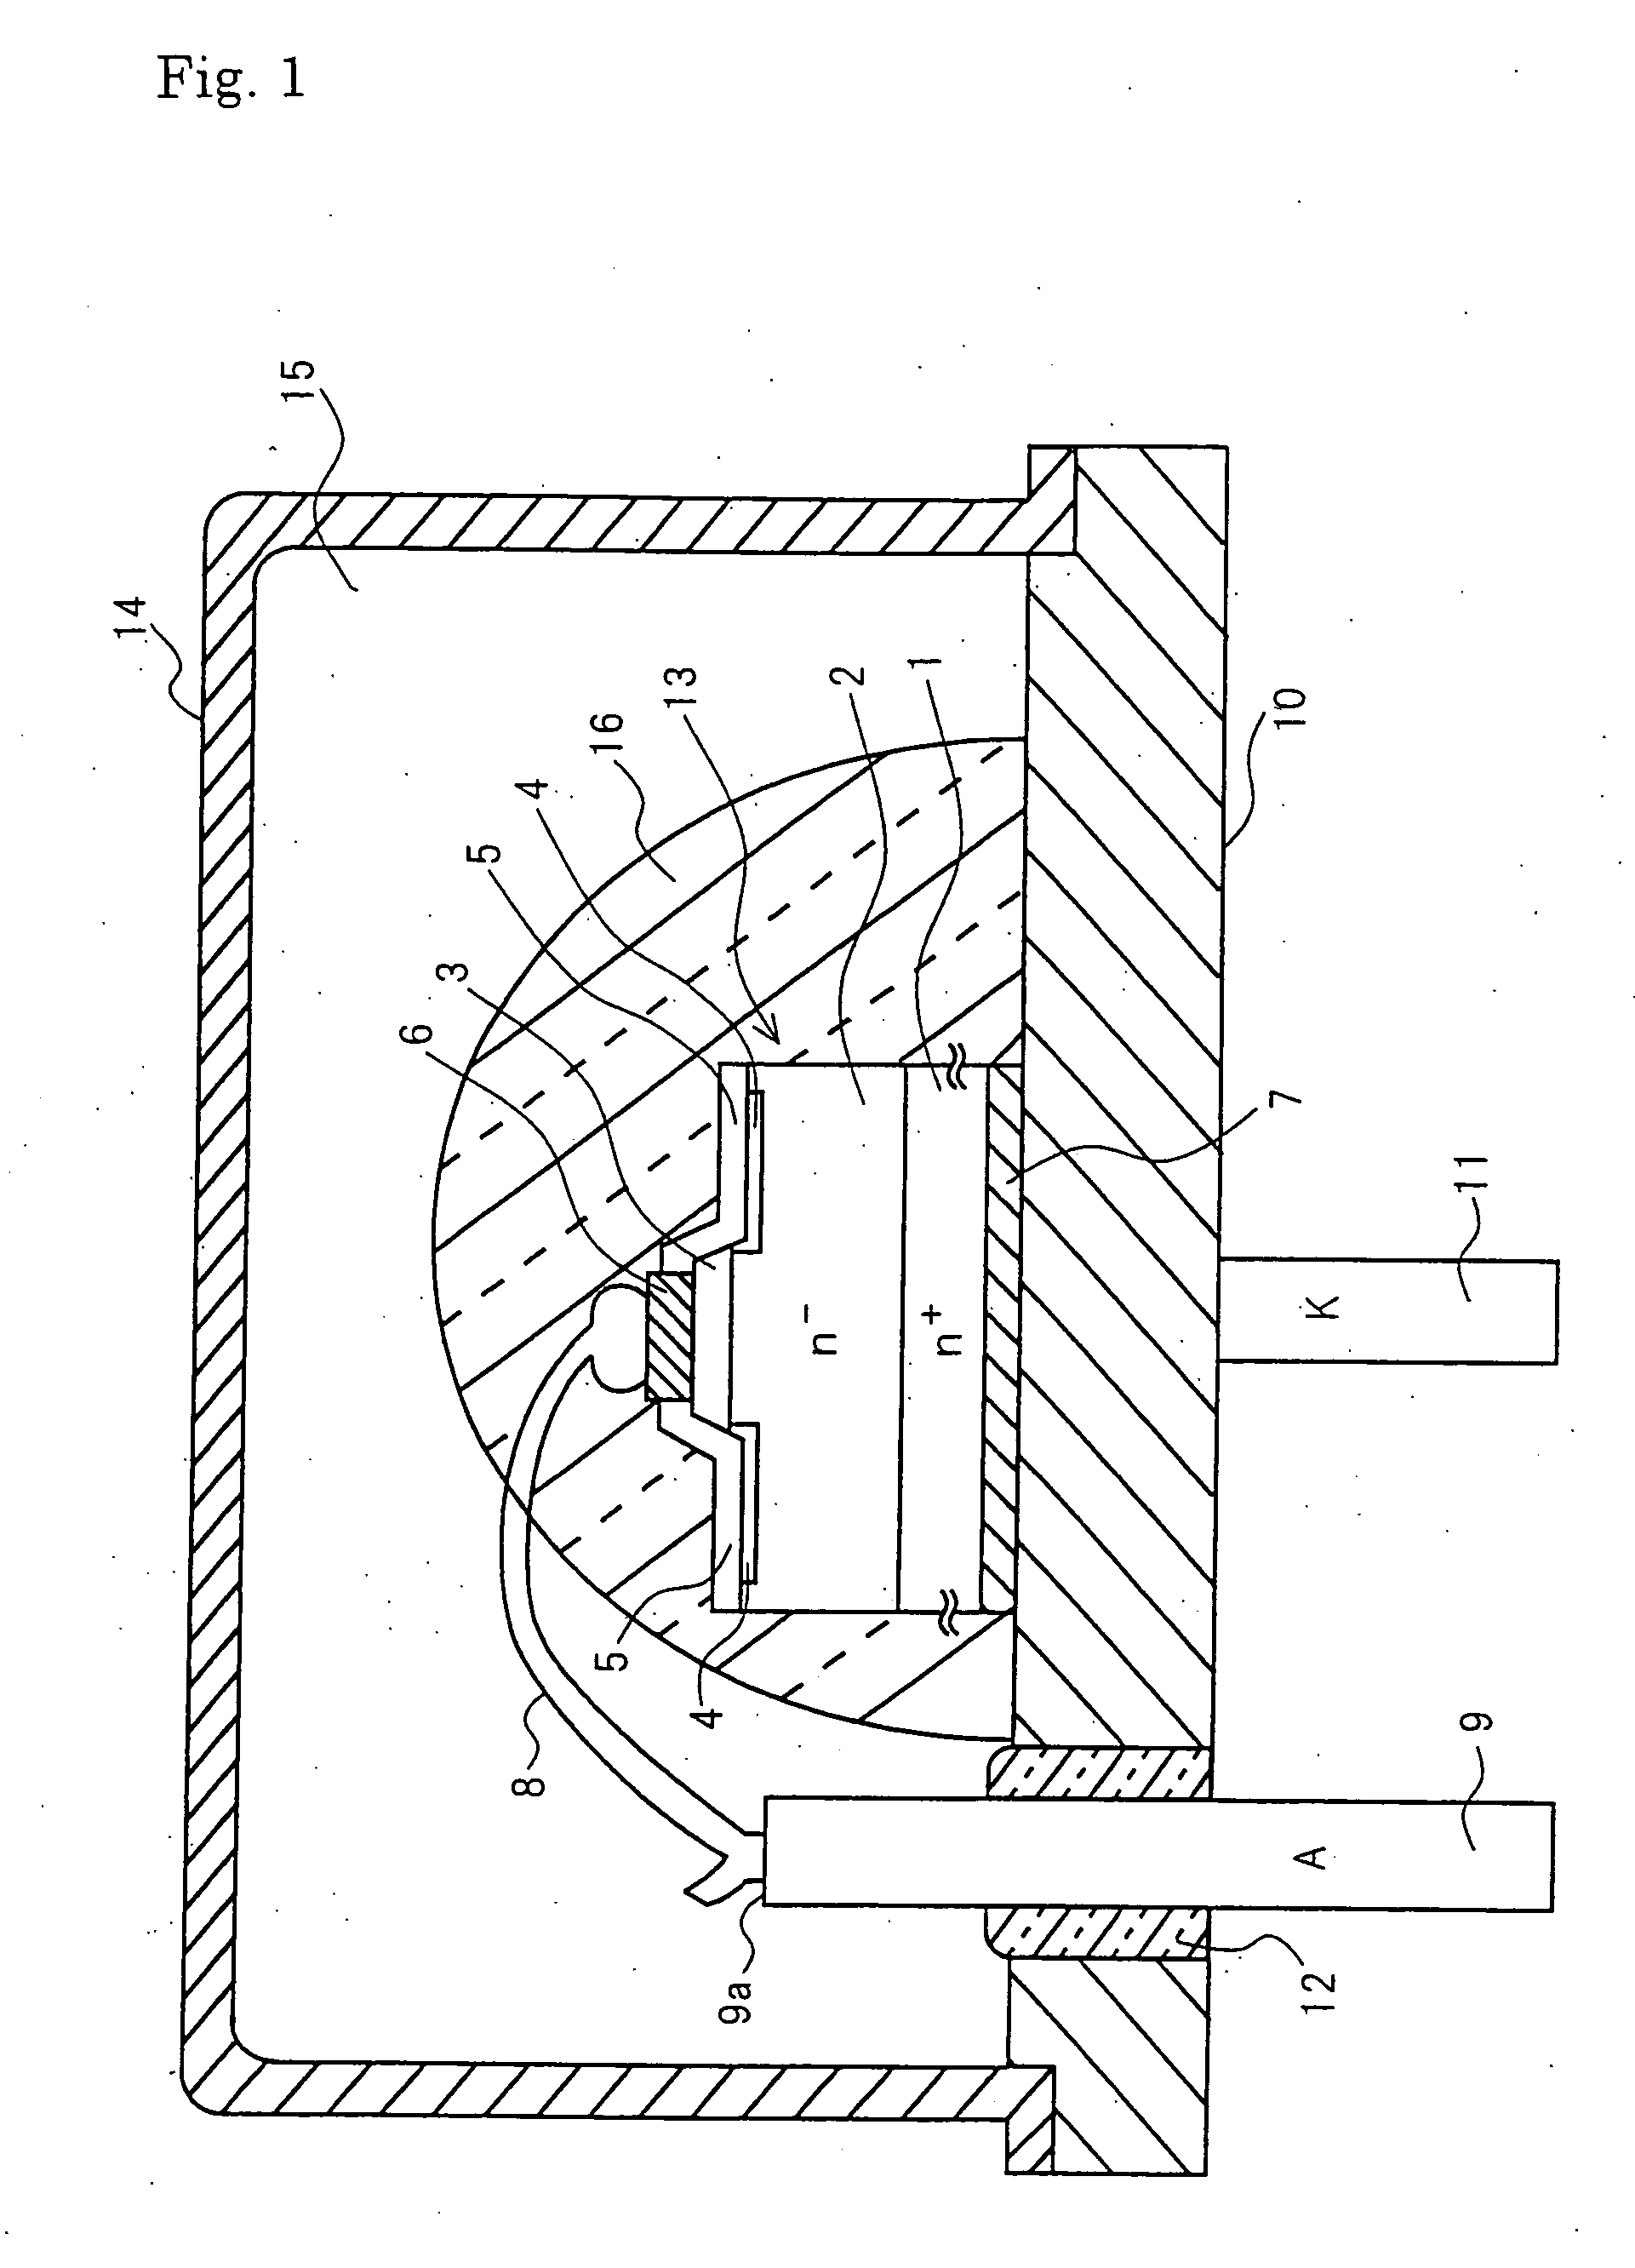 High-heat-resistant semiconductor device